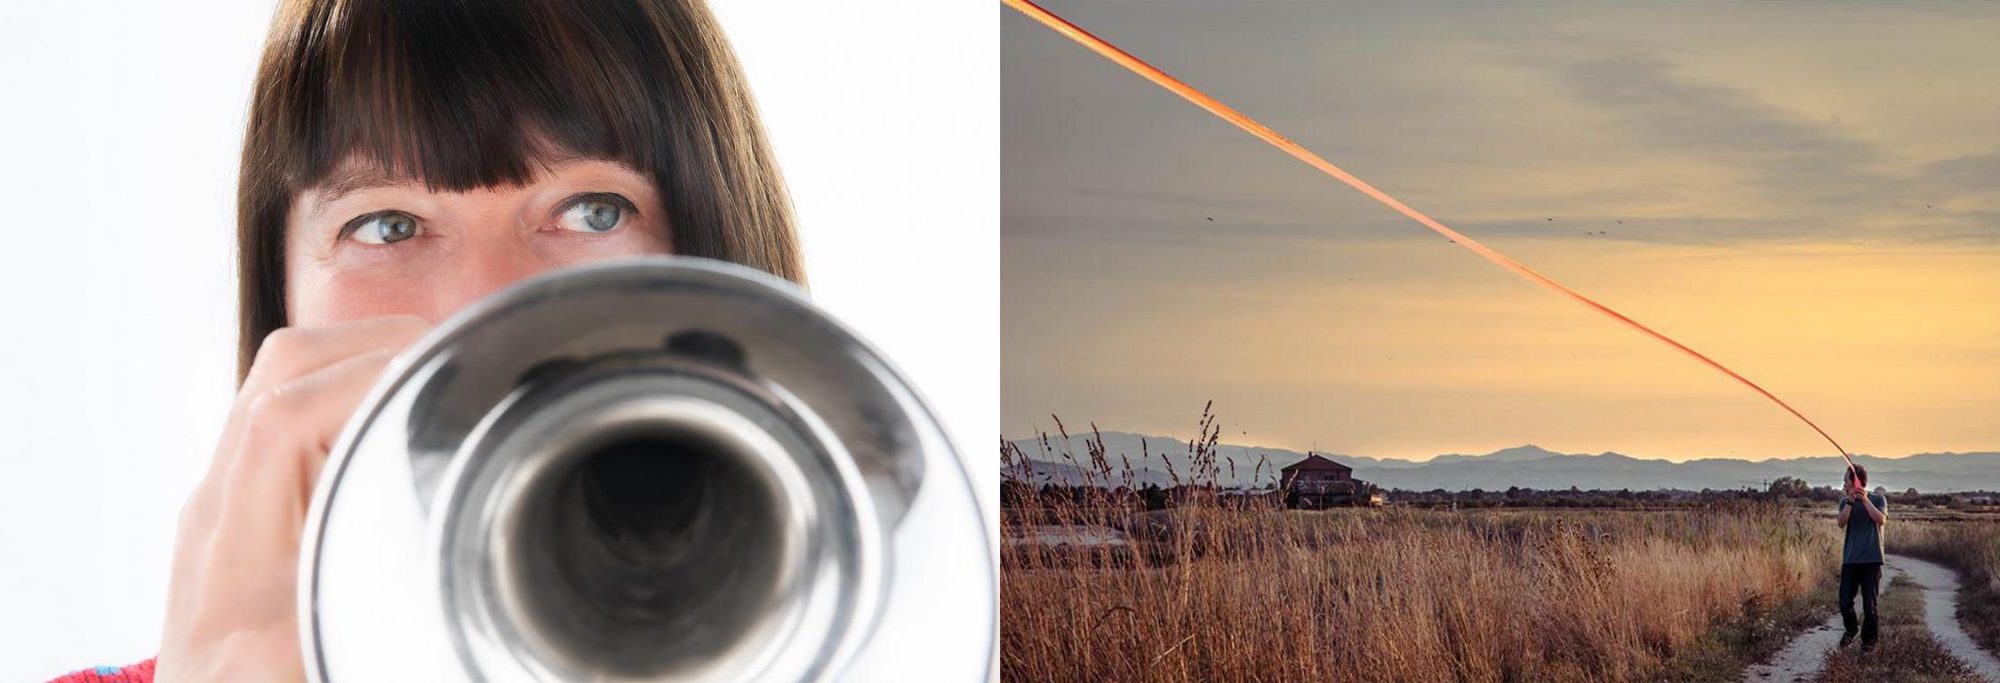 Left picture shows Birgit Ulher, German composer-performer, sound artist. Right picture shows Seiji Morimoto with sky tape. He is a Japanese artist who works with performance, composition and installation